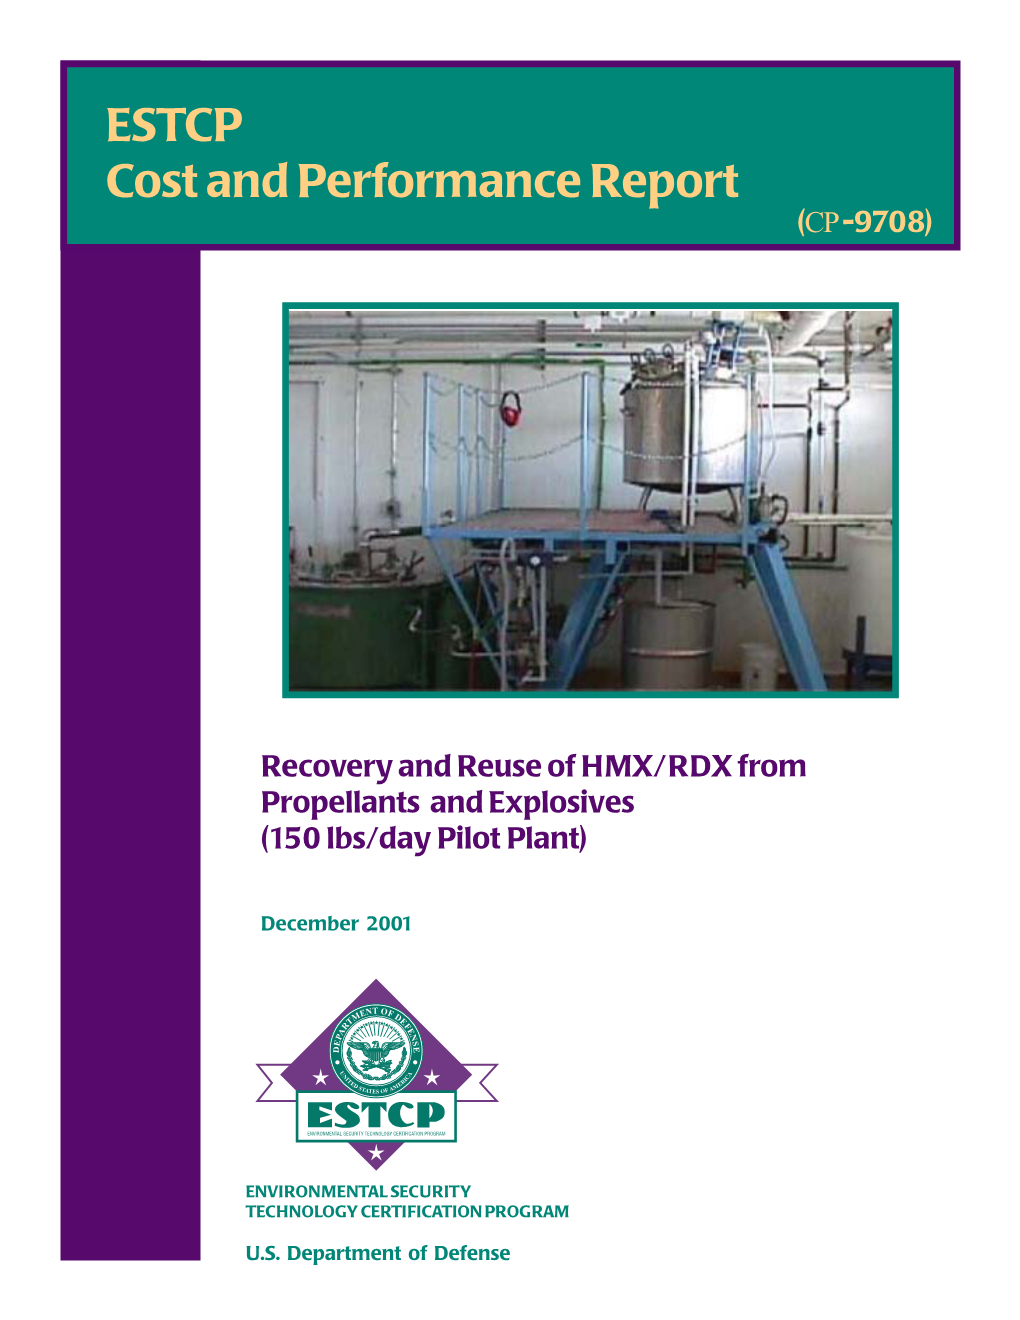 ESTCP Cost and Performance Report (CP-9708)